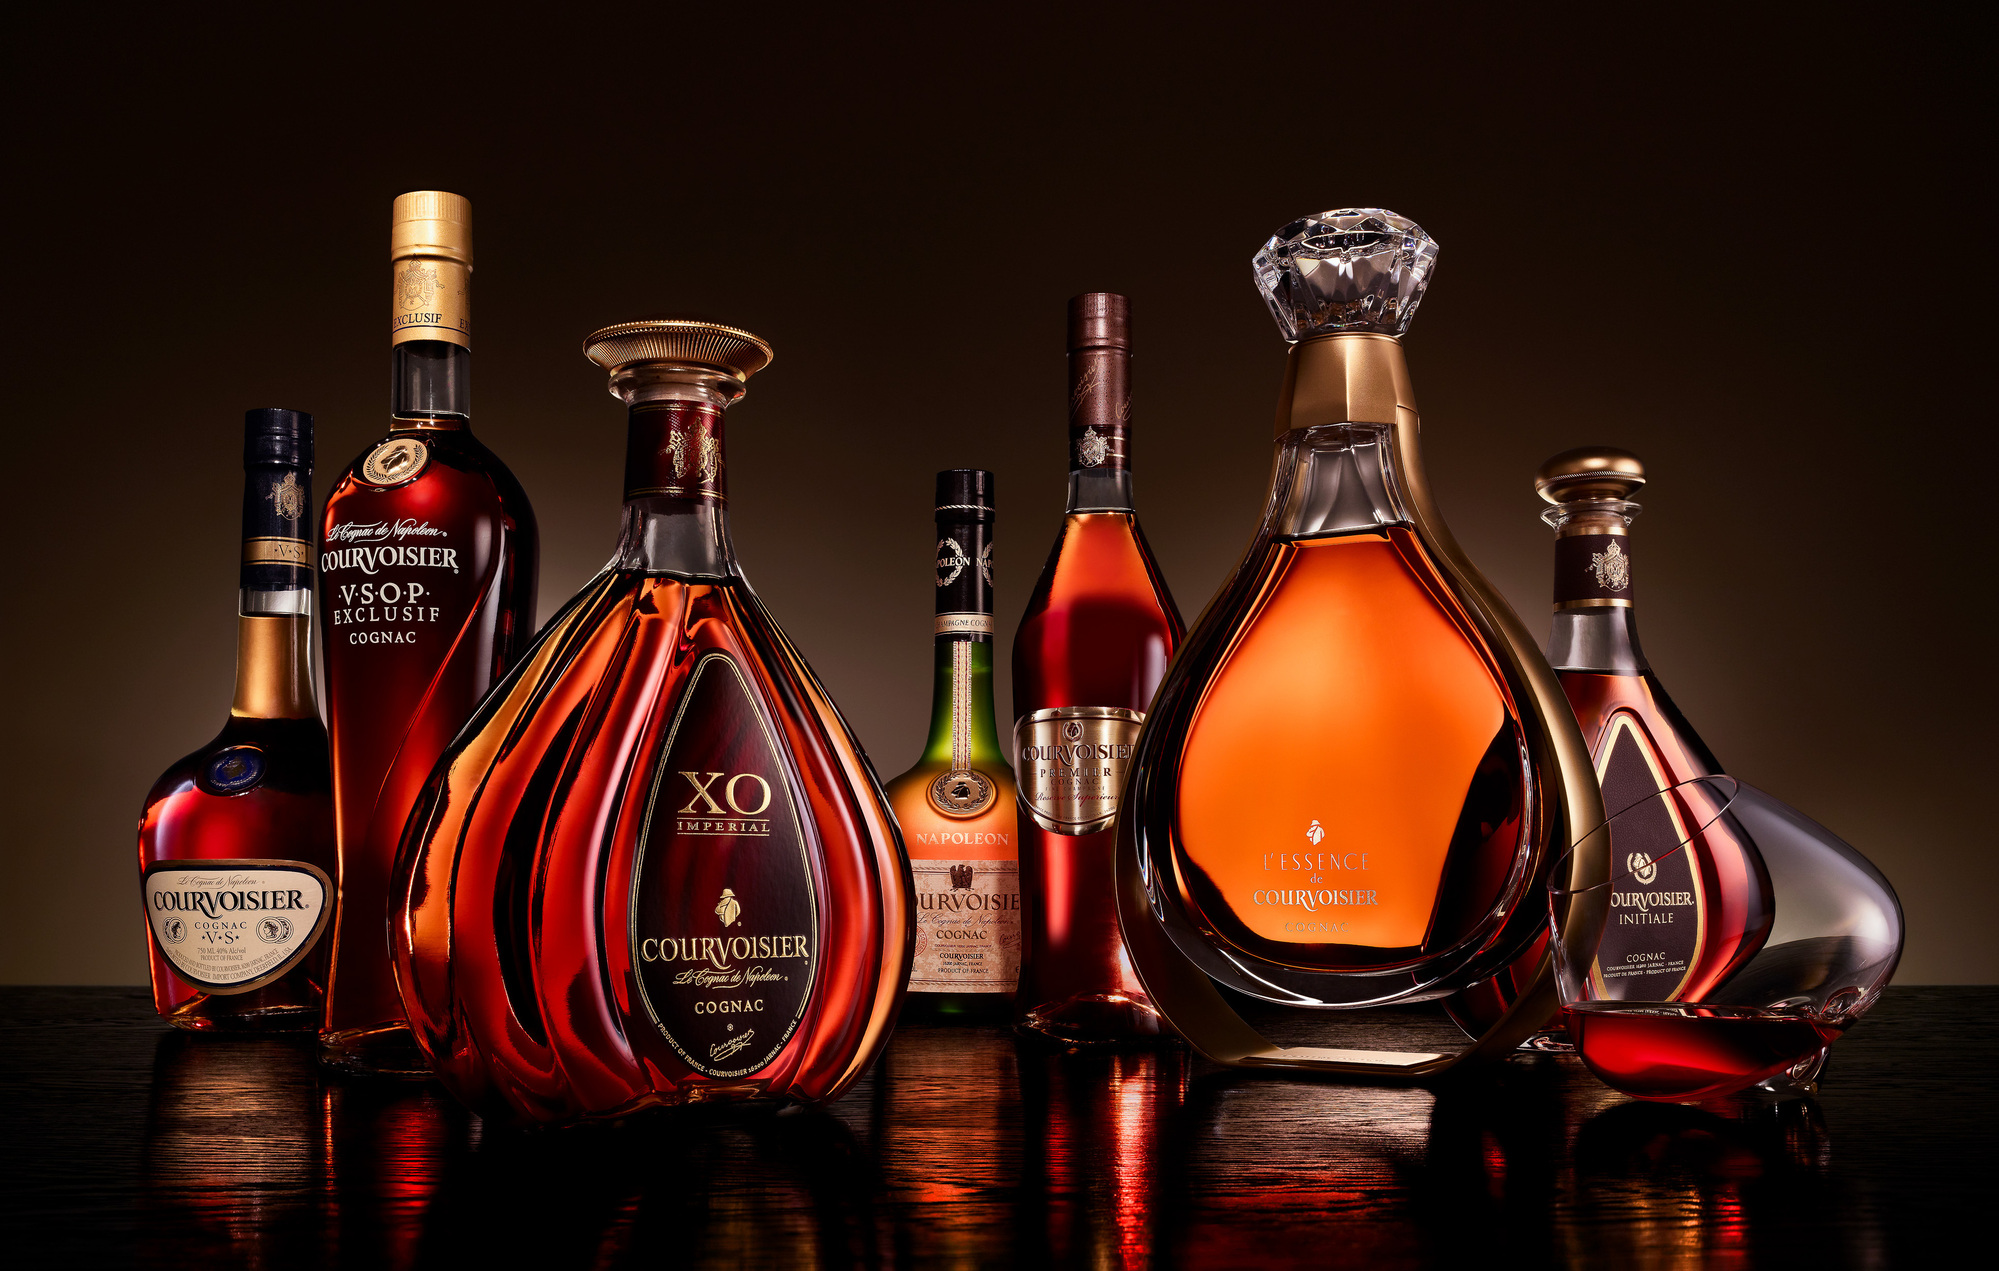 Courvoisier bottle photography. Beverage and liquid product & advertising photography by Timothy Hogan Studio in Los Angeles